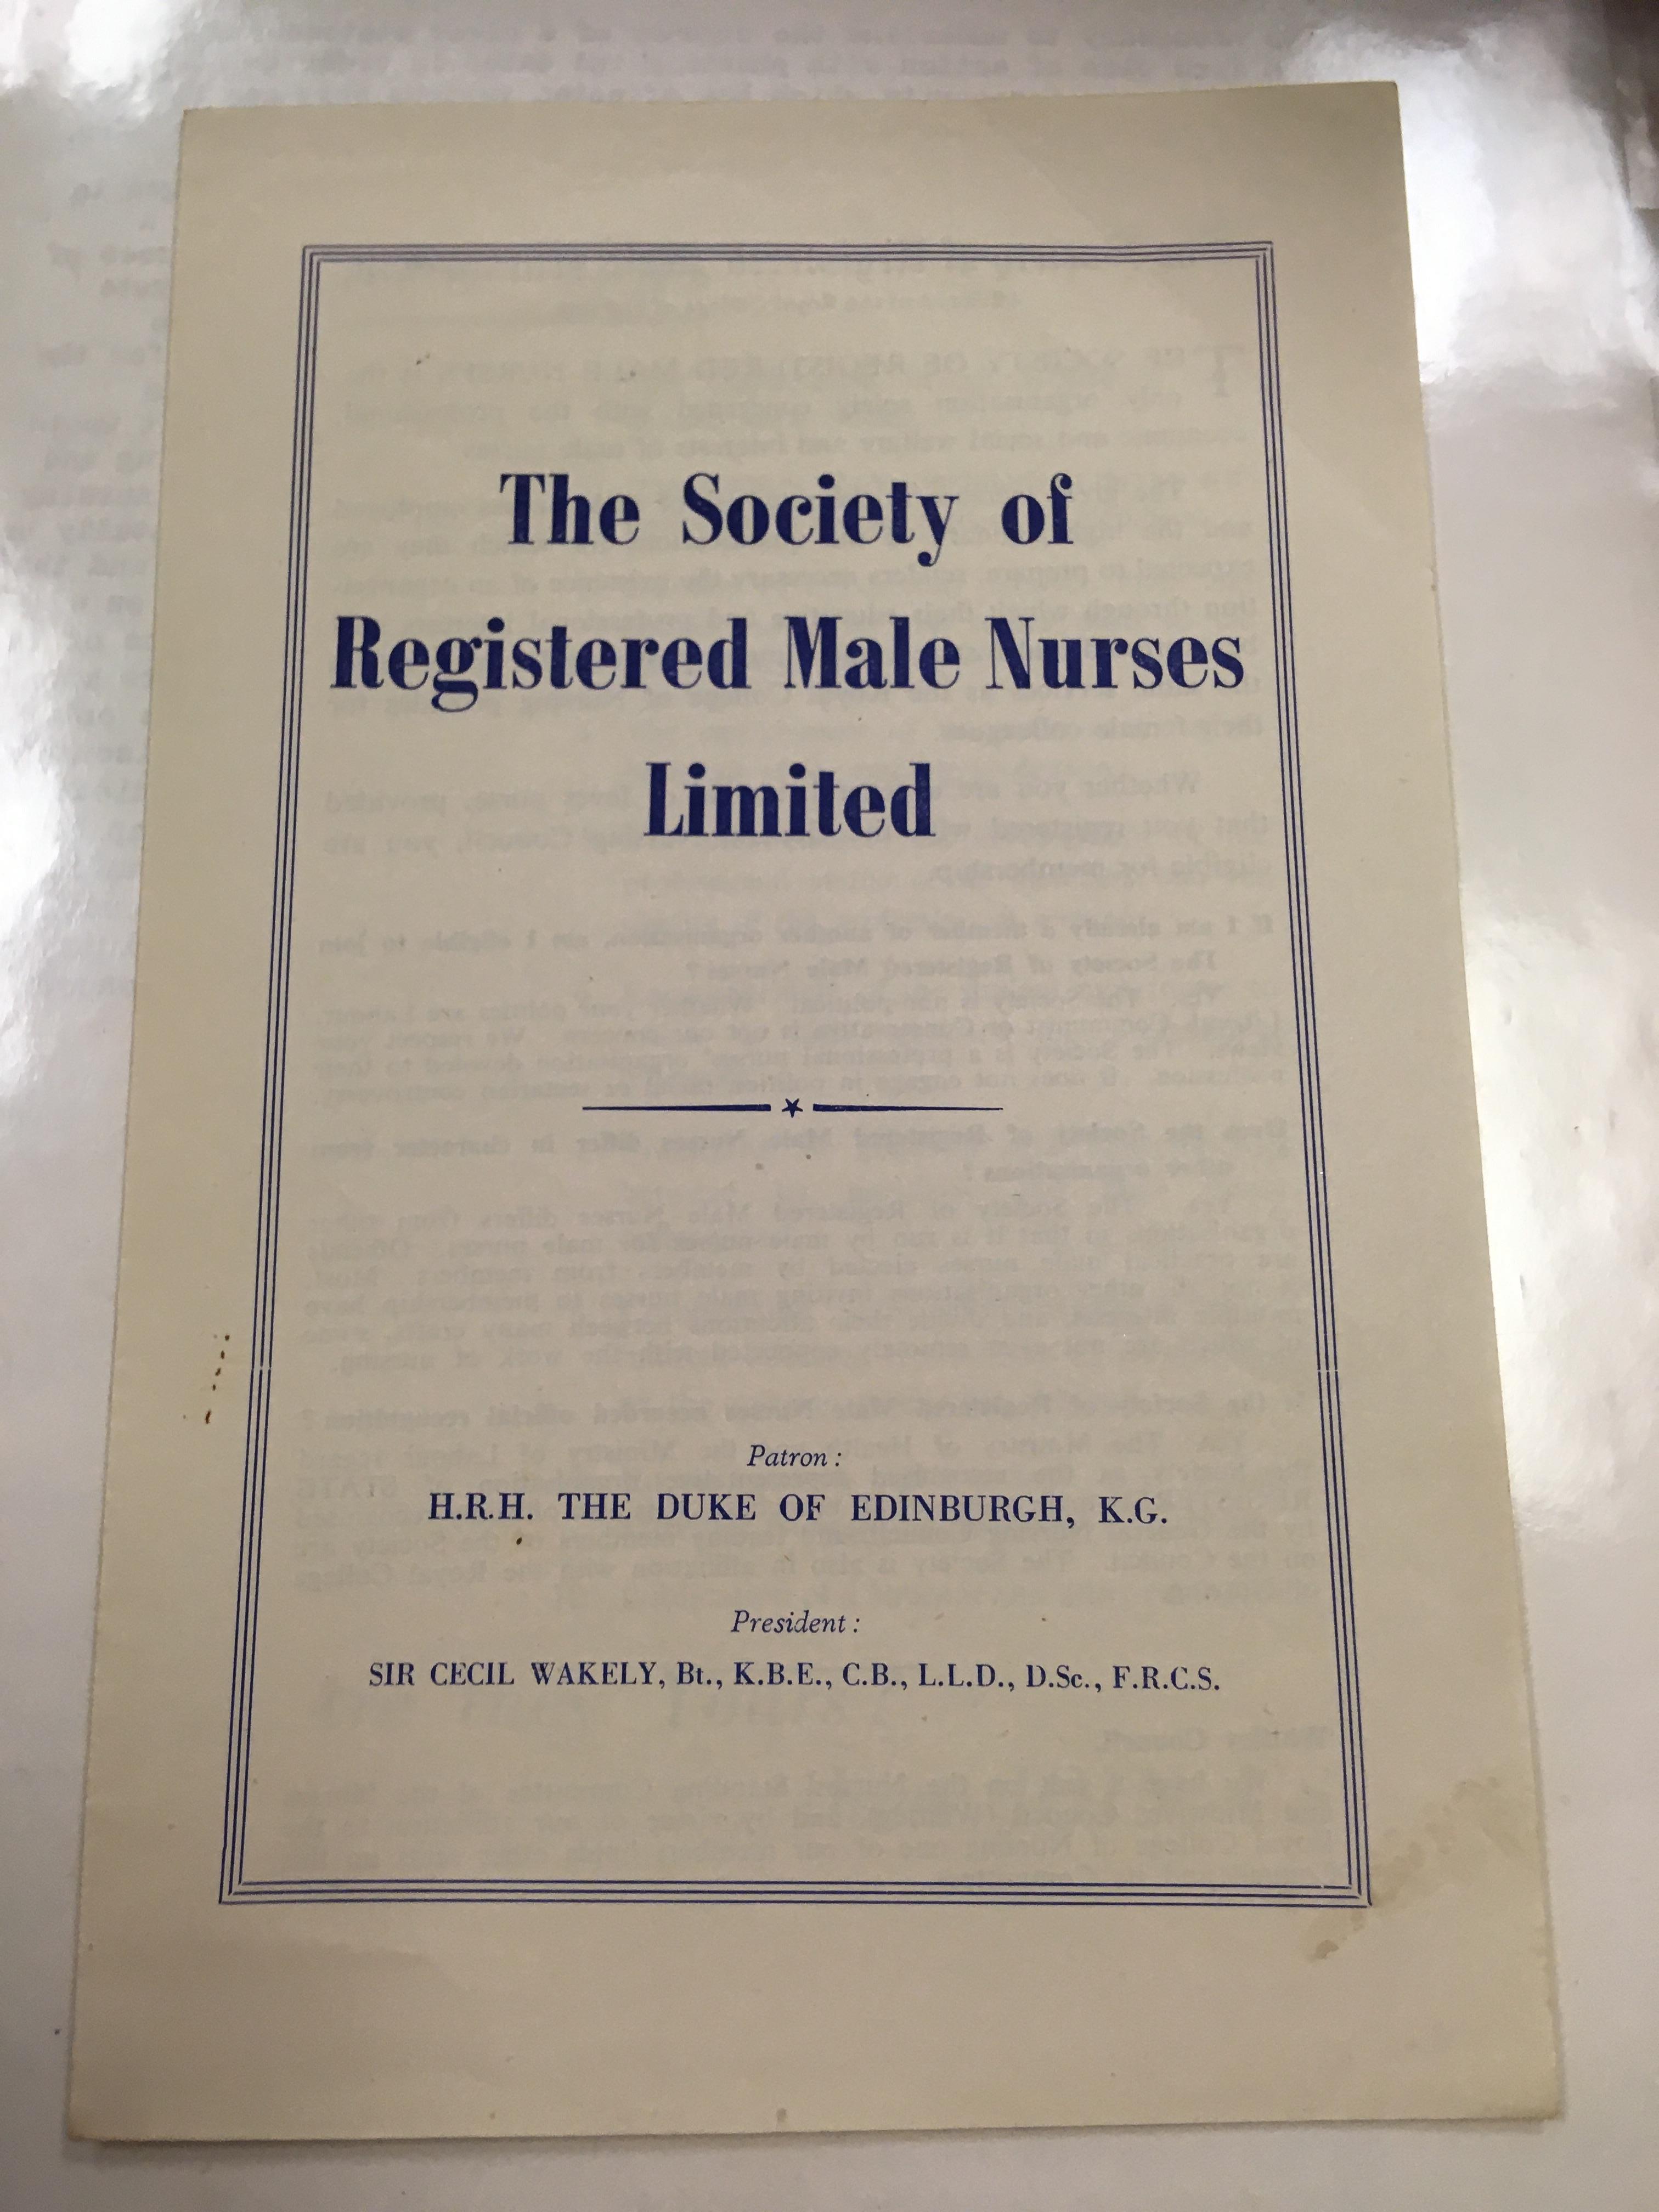 The Society of Registered Male Nurses limited